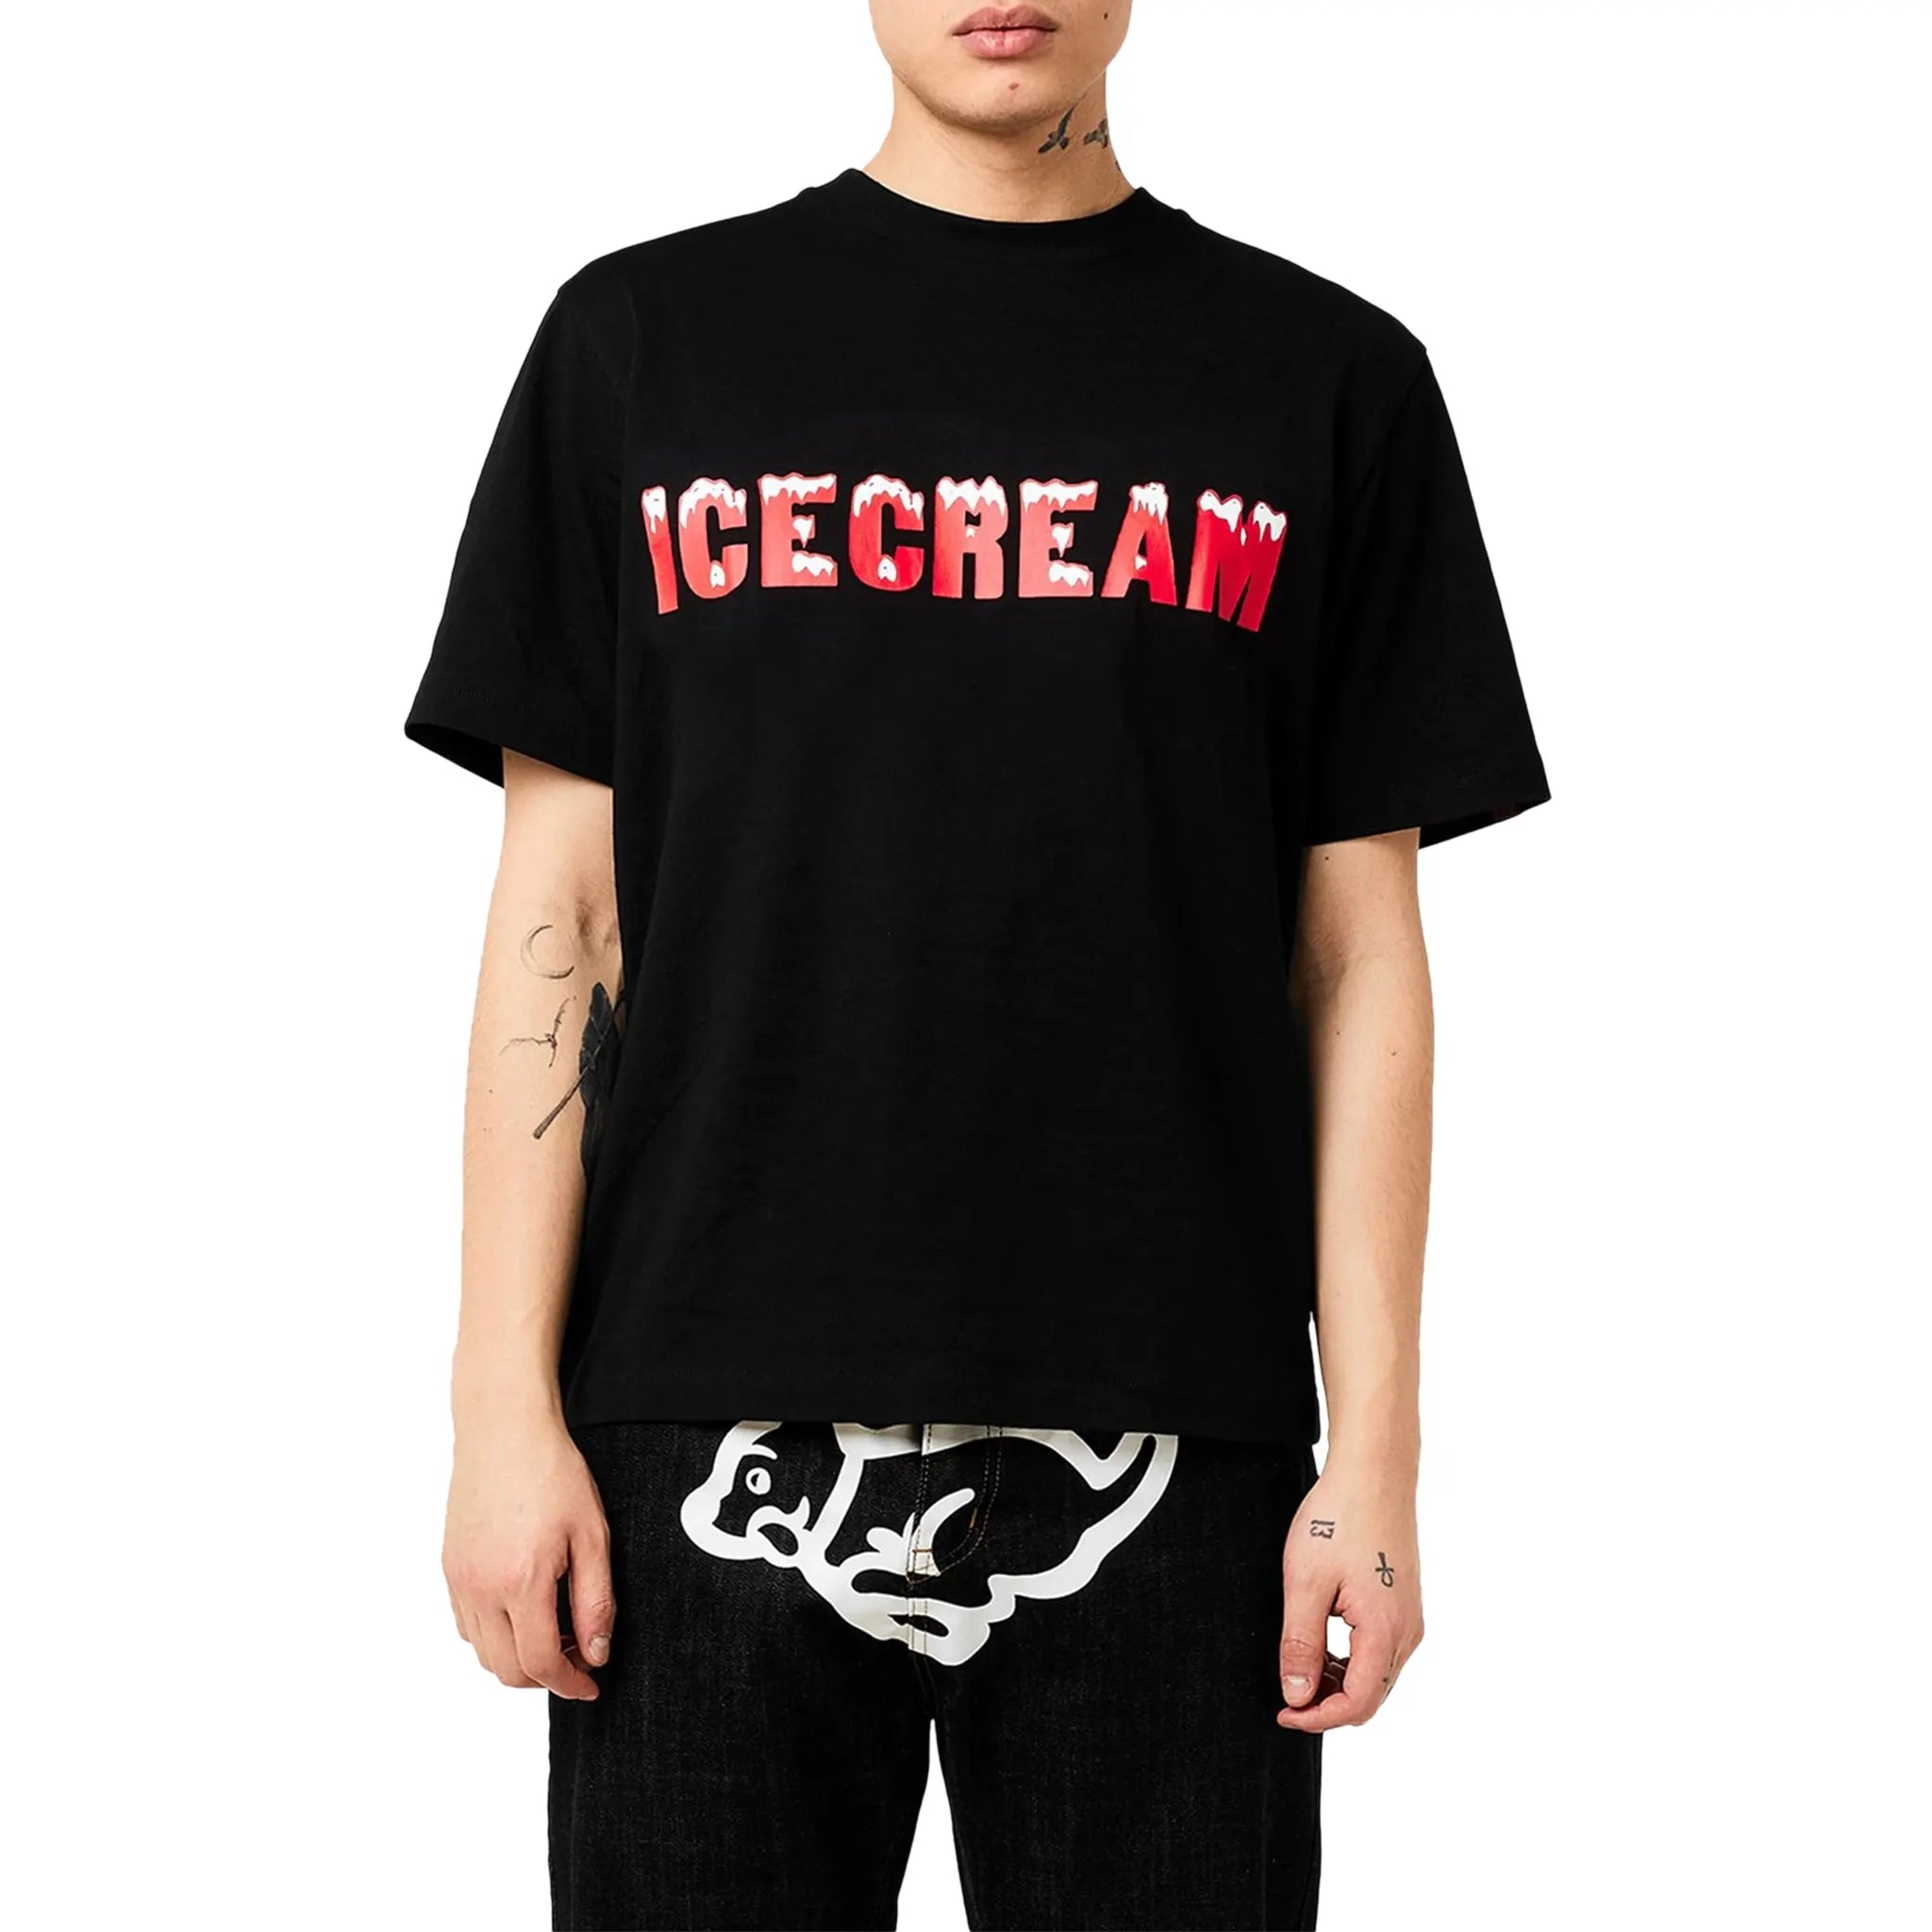 Front Detail view of Icecream IC Drippy Black T Shirt ic23439-blk